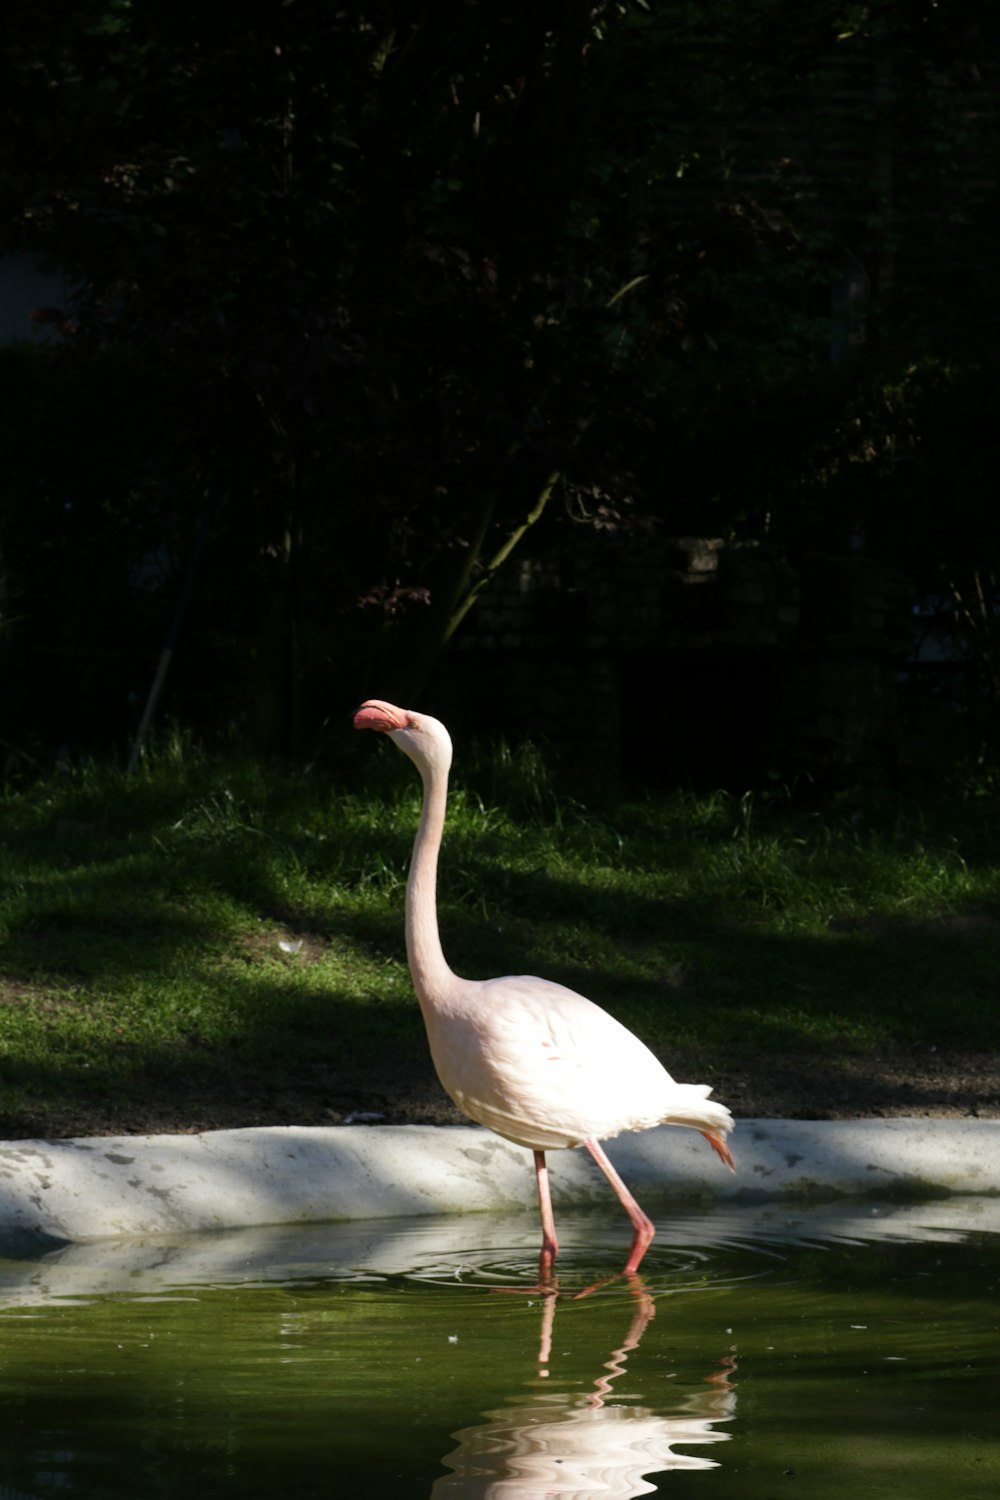 white swan on gray concrete pavement during daytime